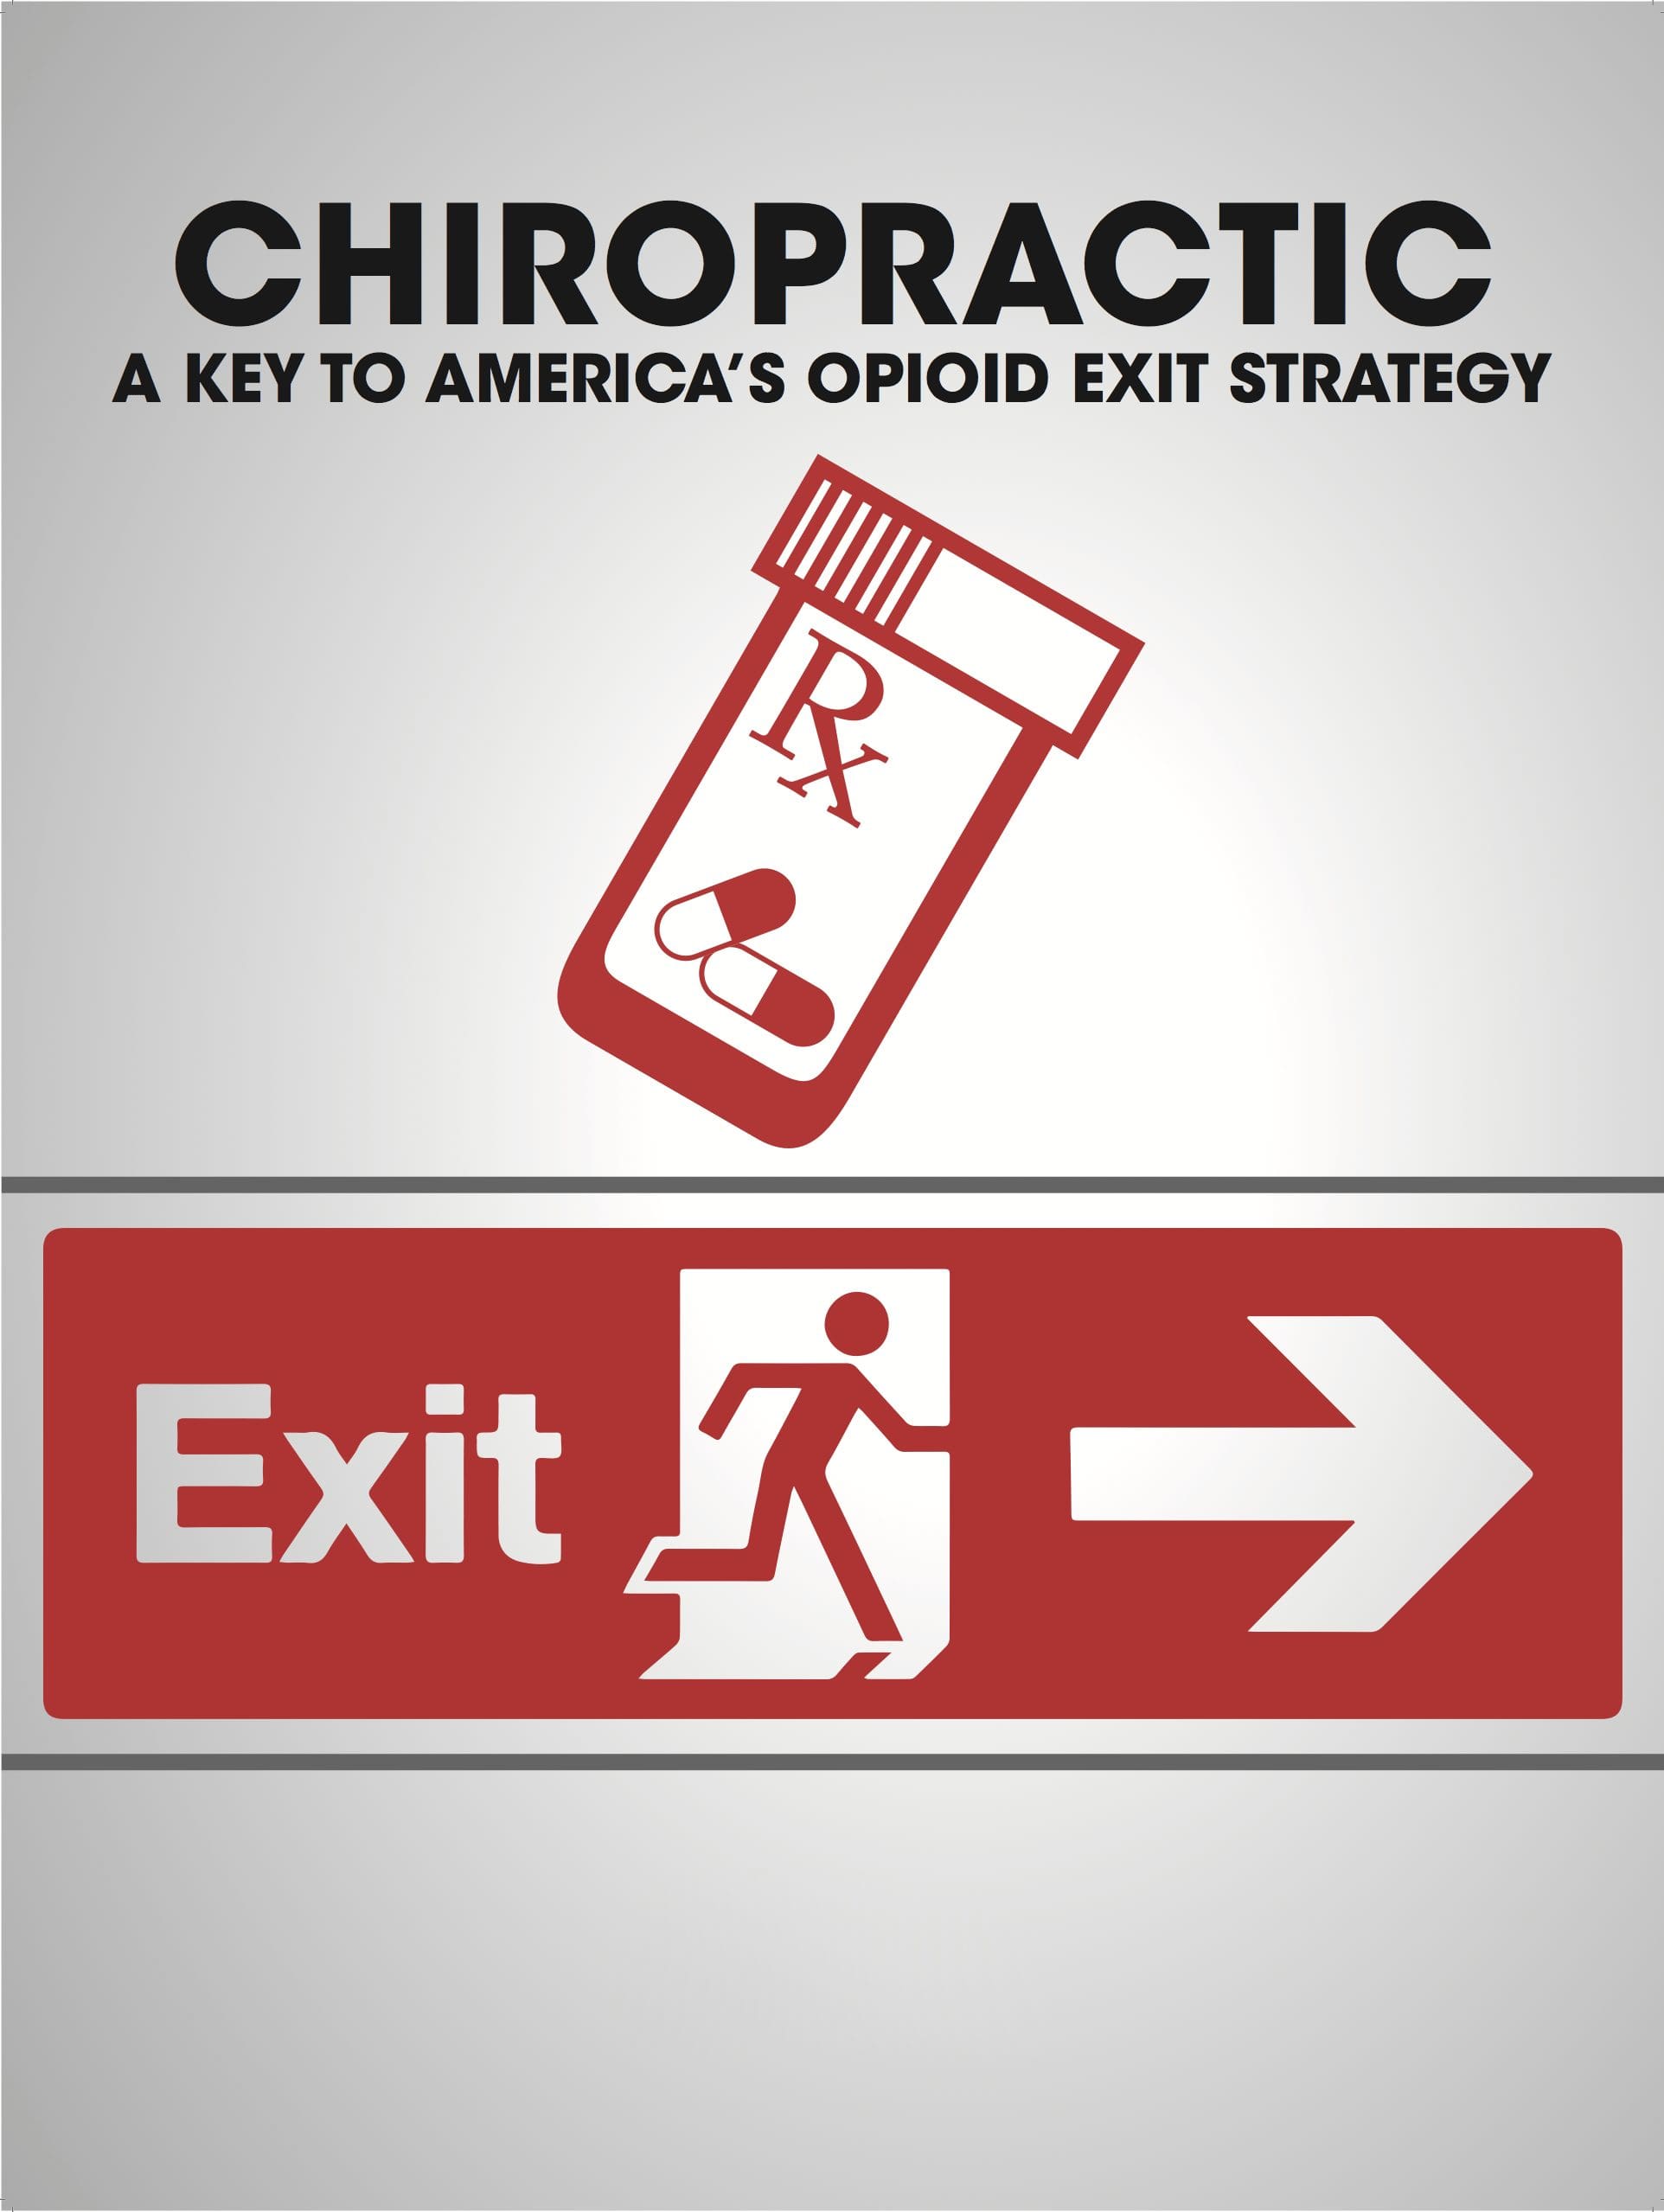 bottle of opioids and an exit sign